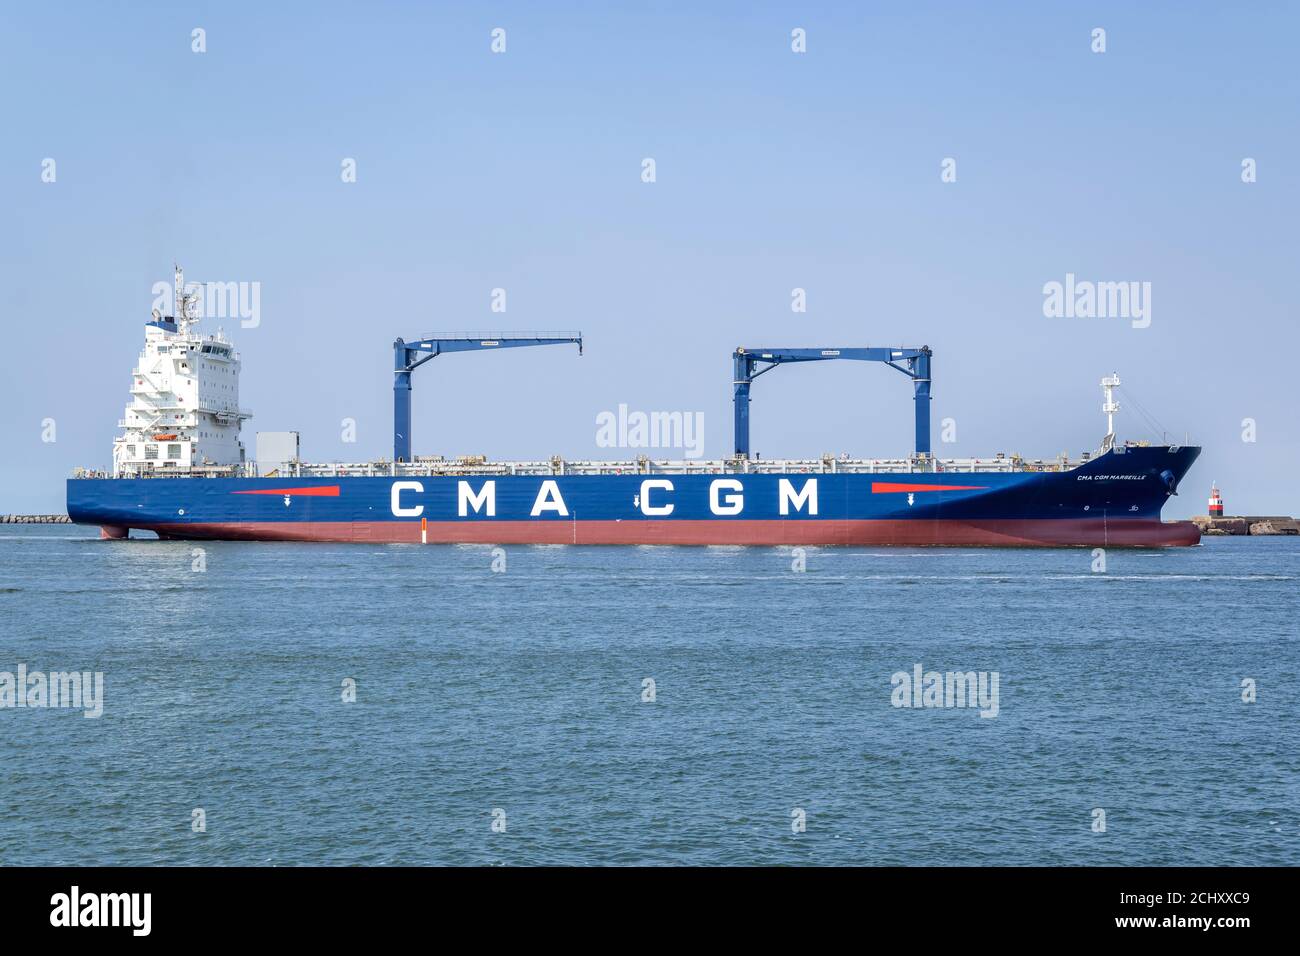 Container Ship CMA CGM MARSEILLE. CMA CGM S.A. is a French container transportation and shipping company. Stock Photo